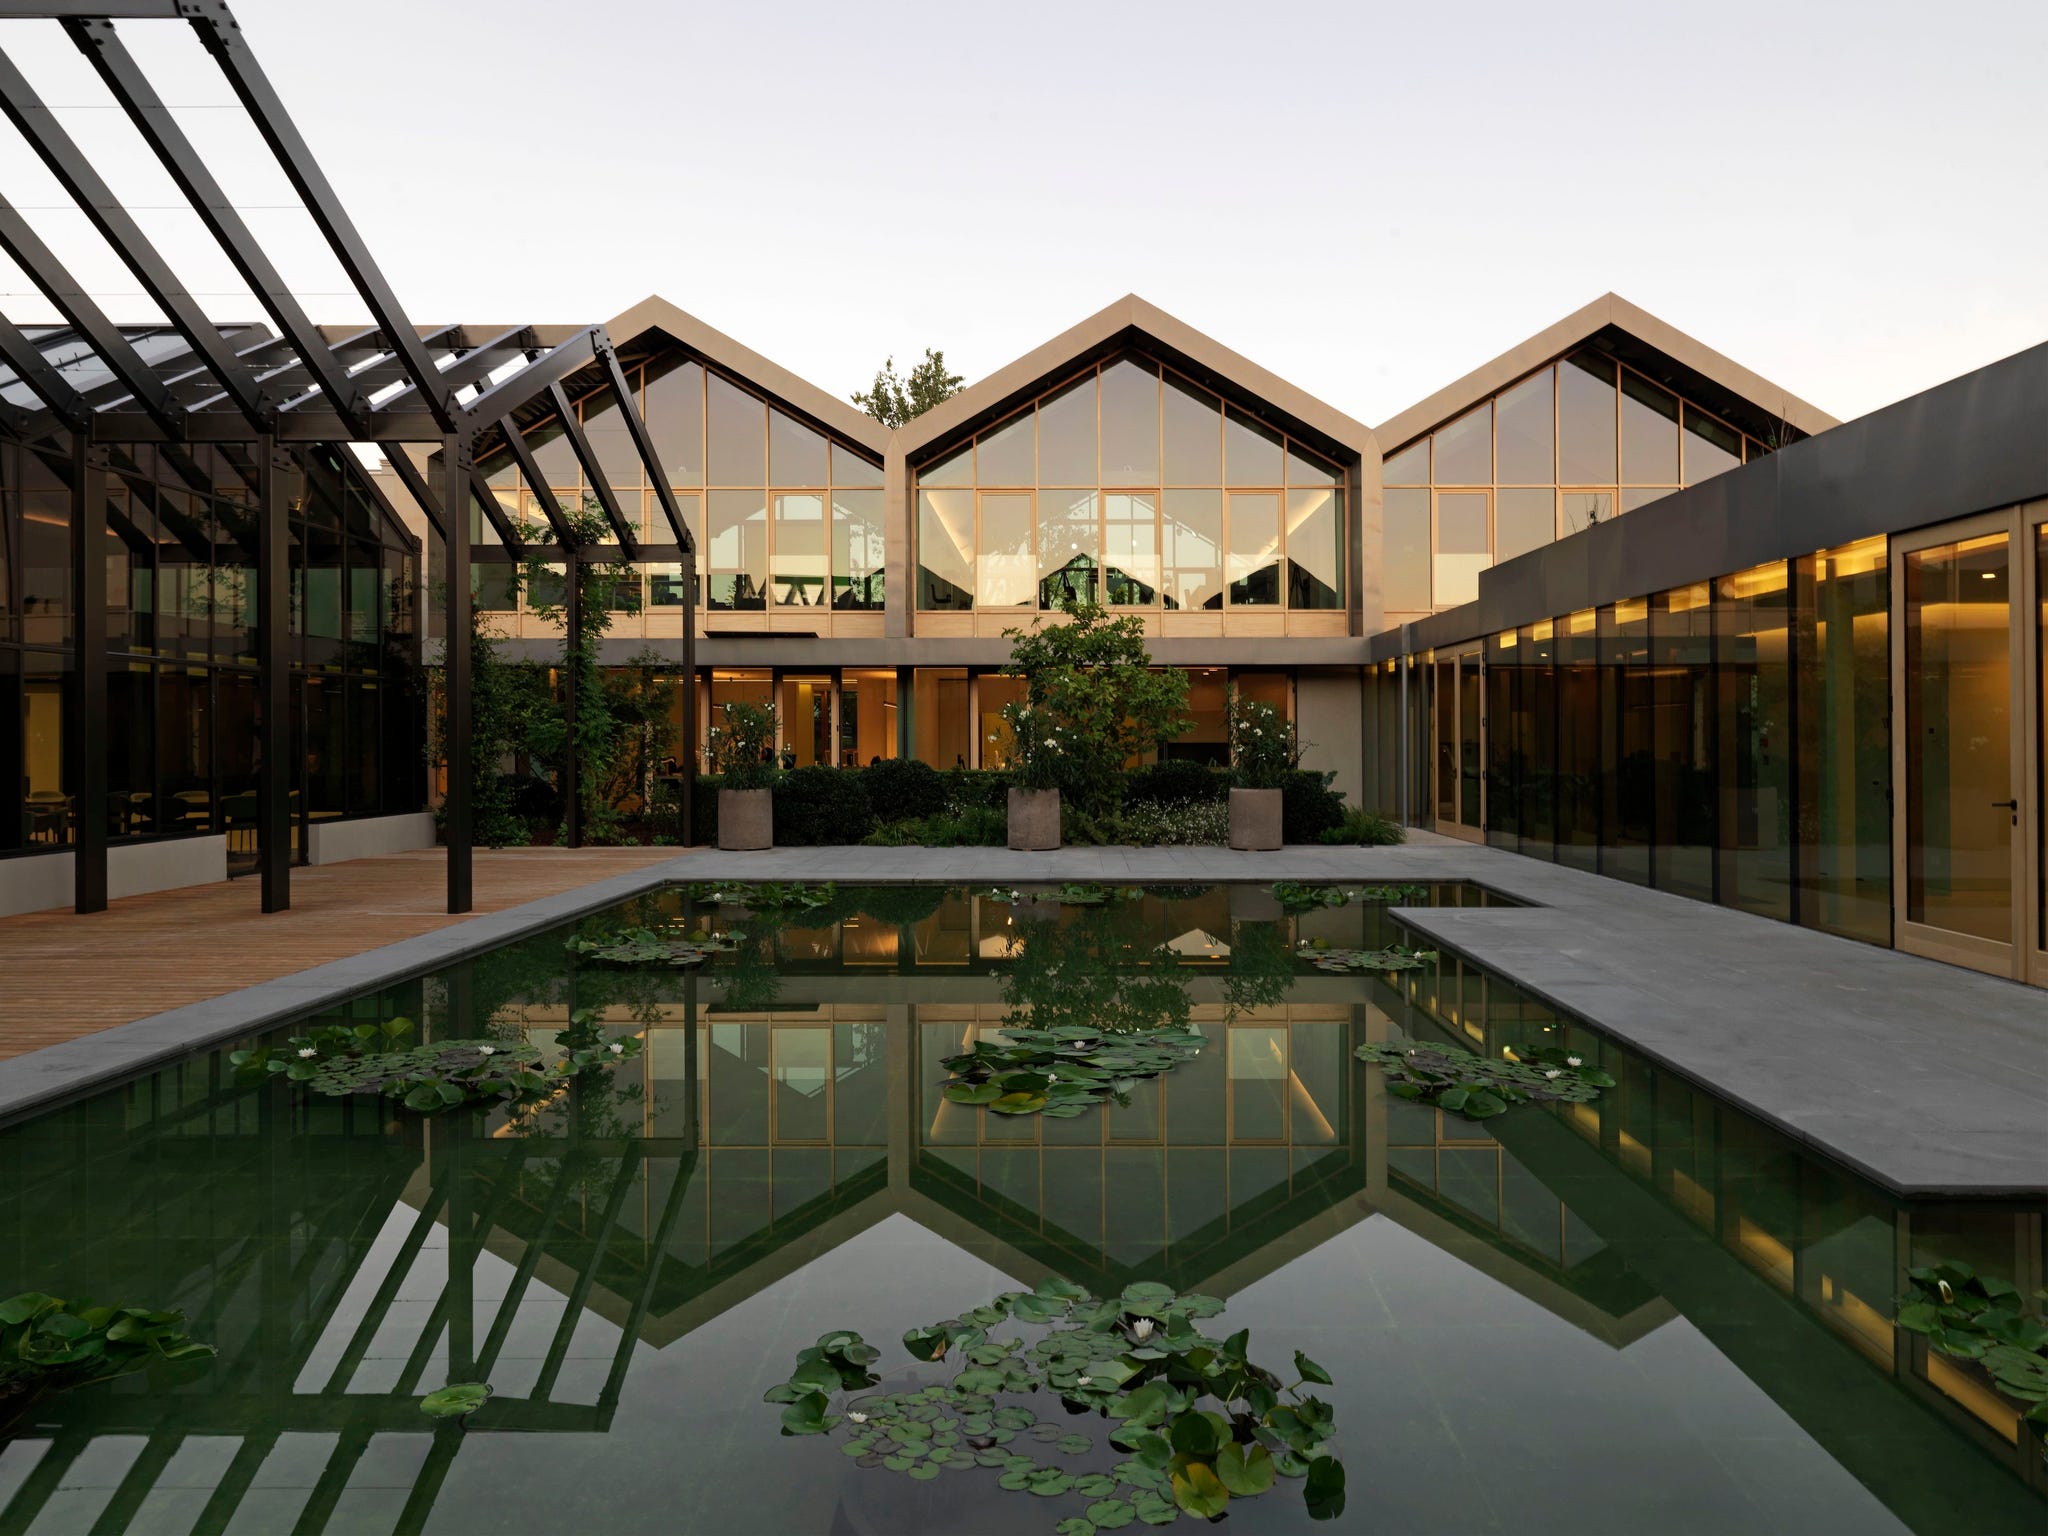 Architecture, Building, Reflecting pool, Courtyard, Property, House, Mixed-use, Botany, Home, Residential area, 